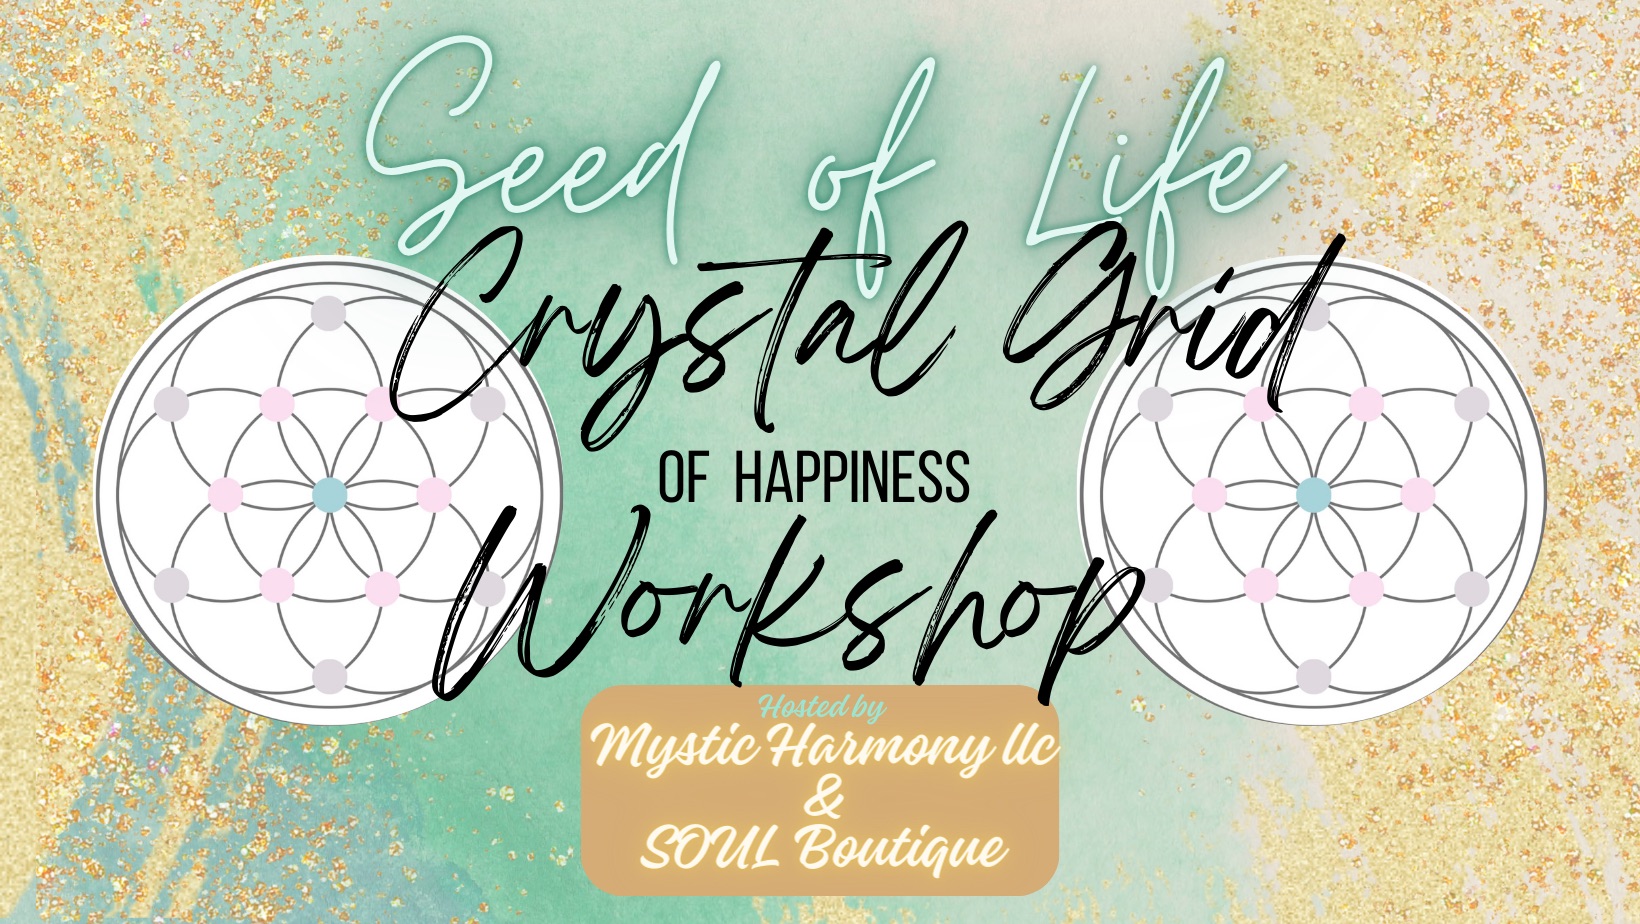 Seed of Life Crystal Grid of Happiness Workshop